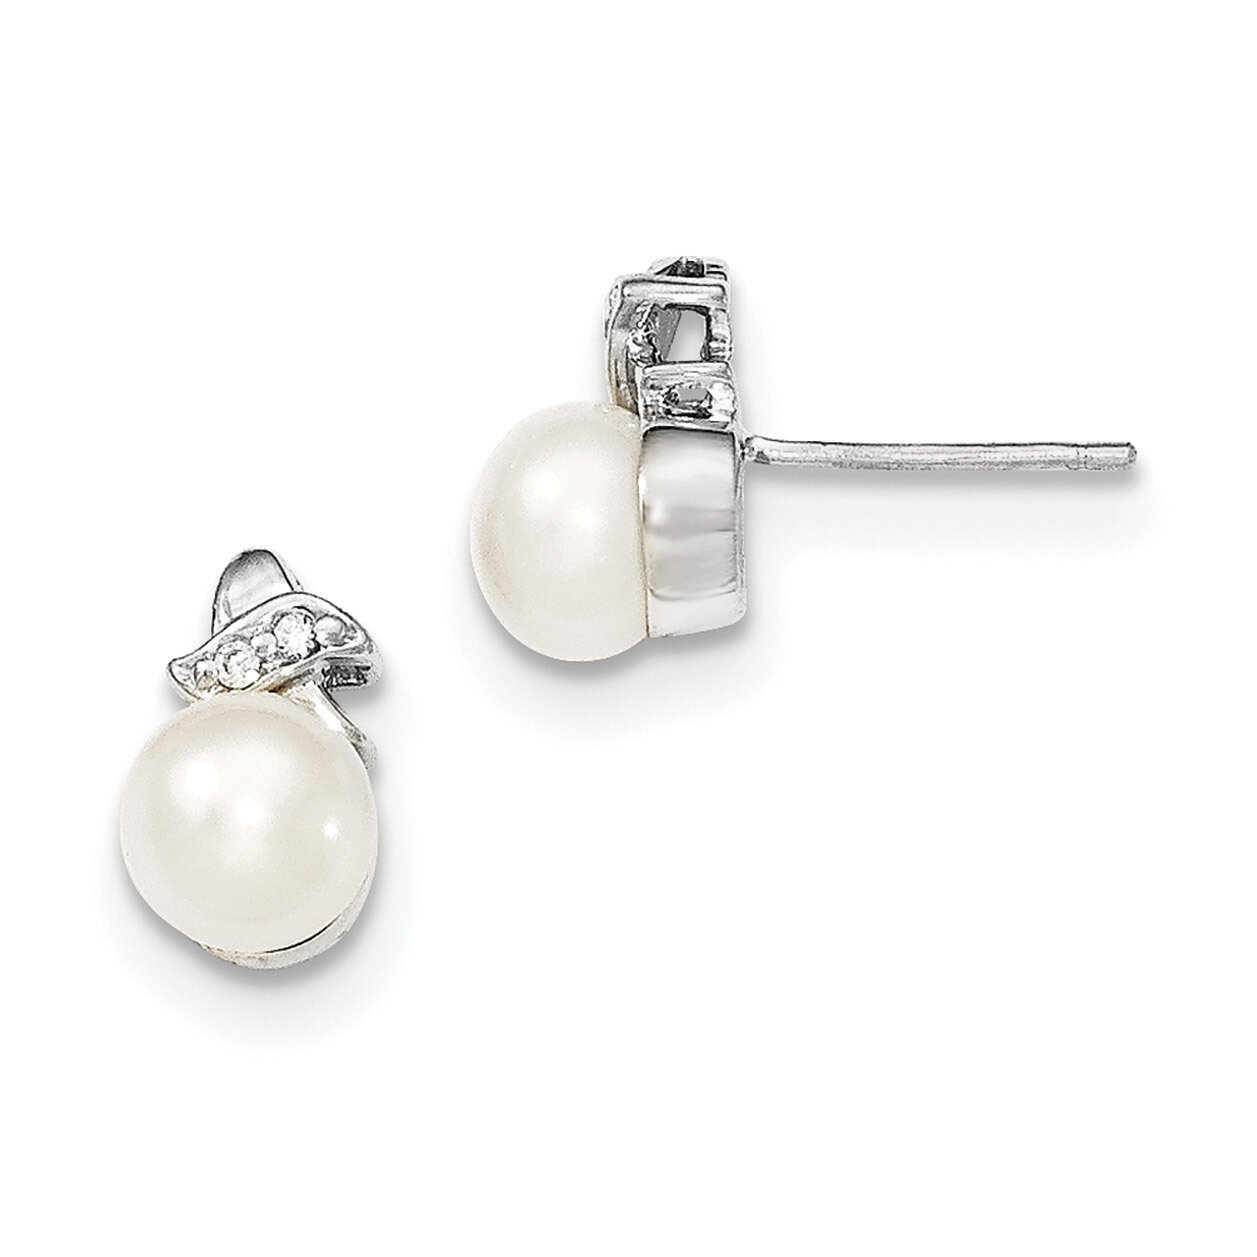 7-8mm White Freshwater Cultured Pearl CZ Diamond Post Earrings Sterling Silver QE12765